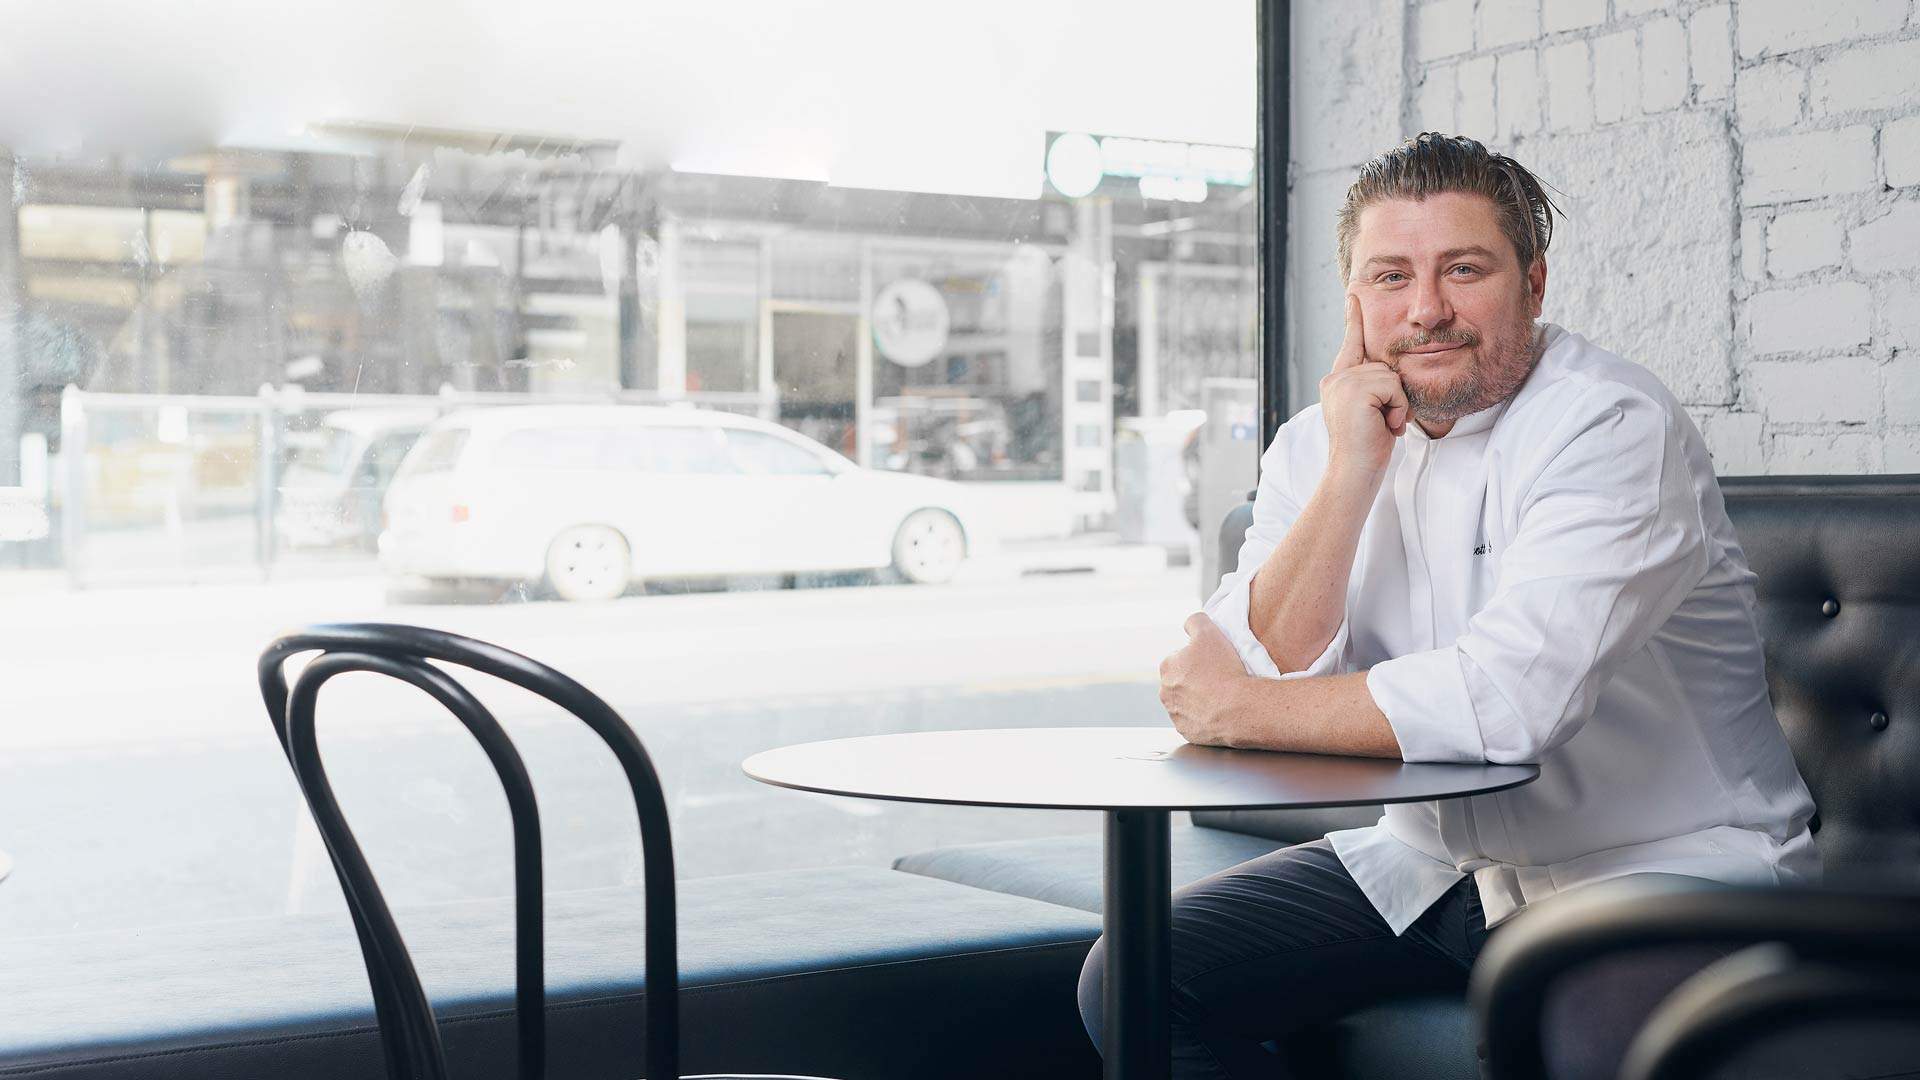 Acclaimed Melbourne Chef Scott Pickett Is Coming to Brisbane to Cook Up a One-Night-Only French Dinner